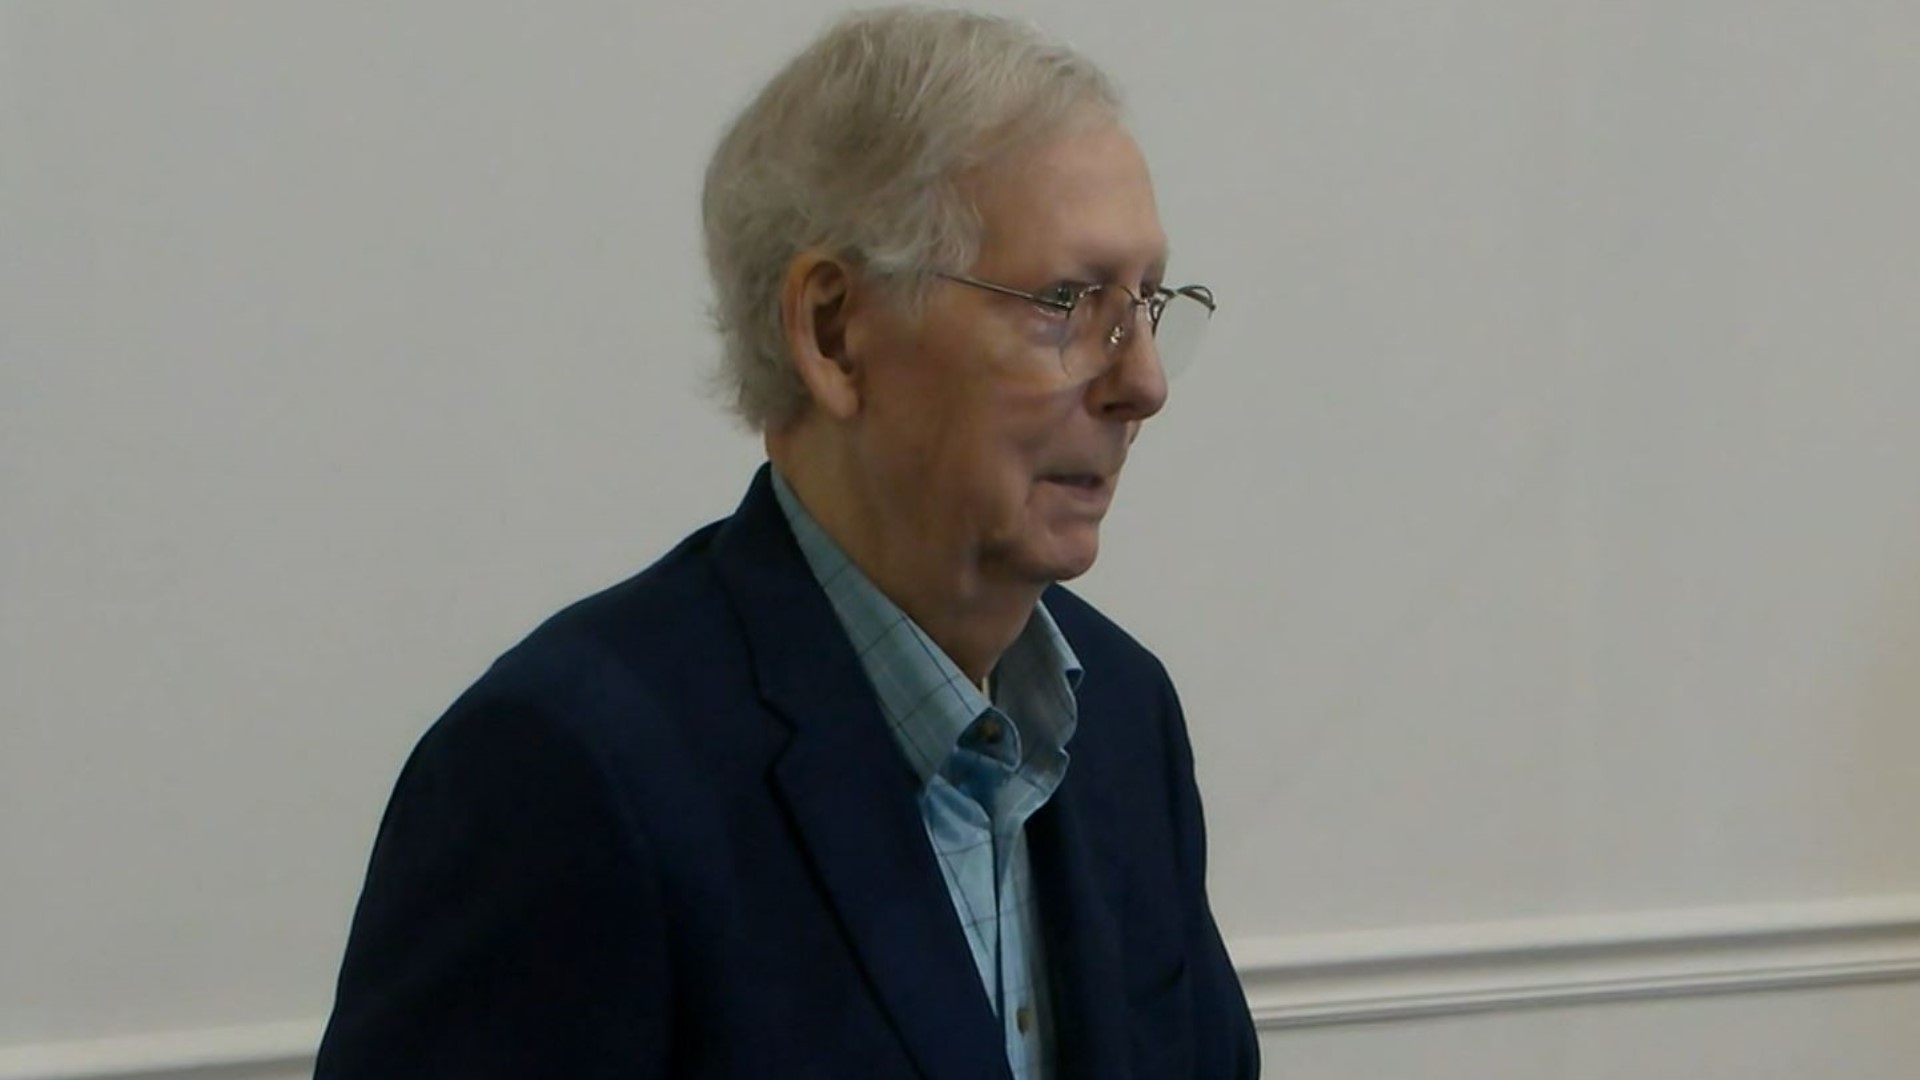 Senate Republican leader Mitch McConnell appeared to briefly freeze up and was unable to answer a question from a reporter at an event in Kentucky on Wednesday.